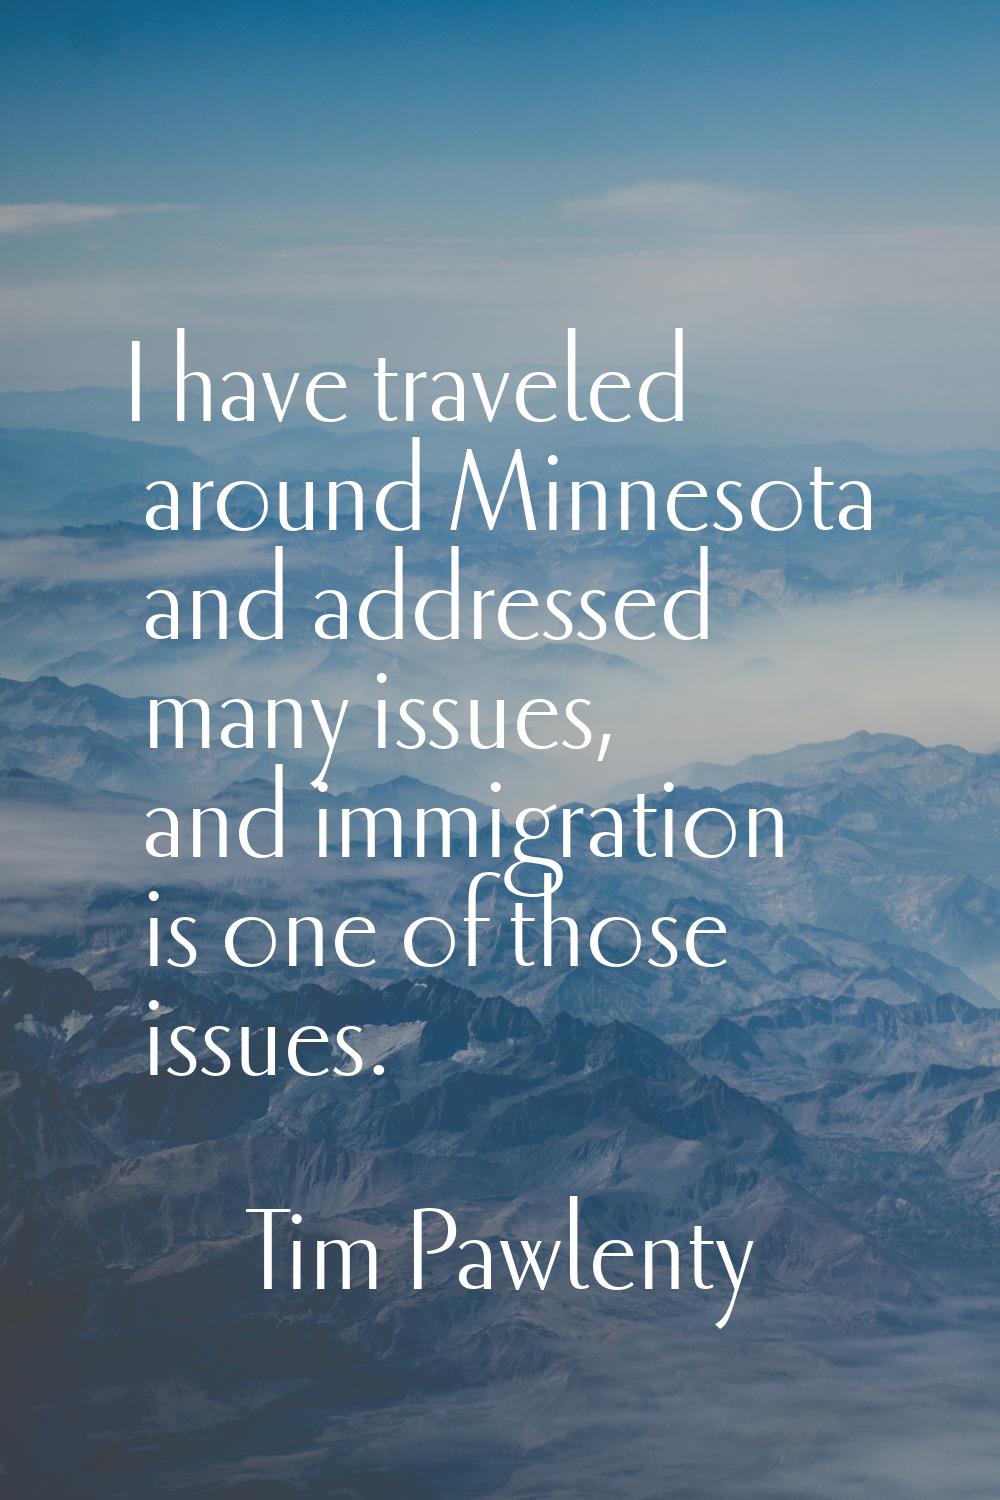 I have traveled around Minnesota and addressed many issues, and immigration is one of those issues.